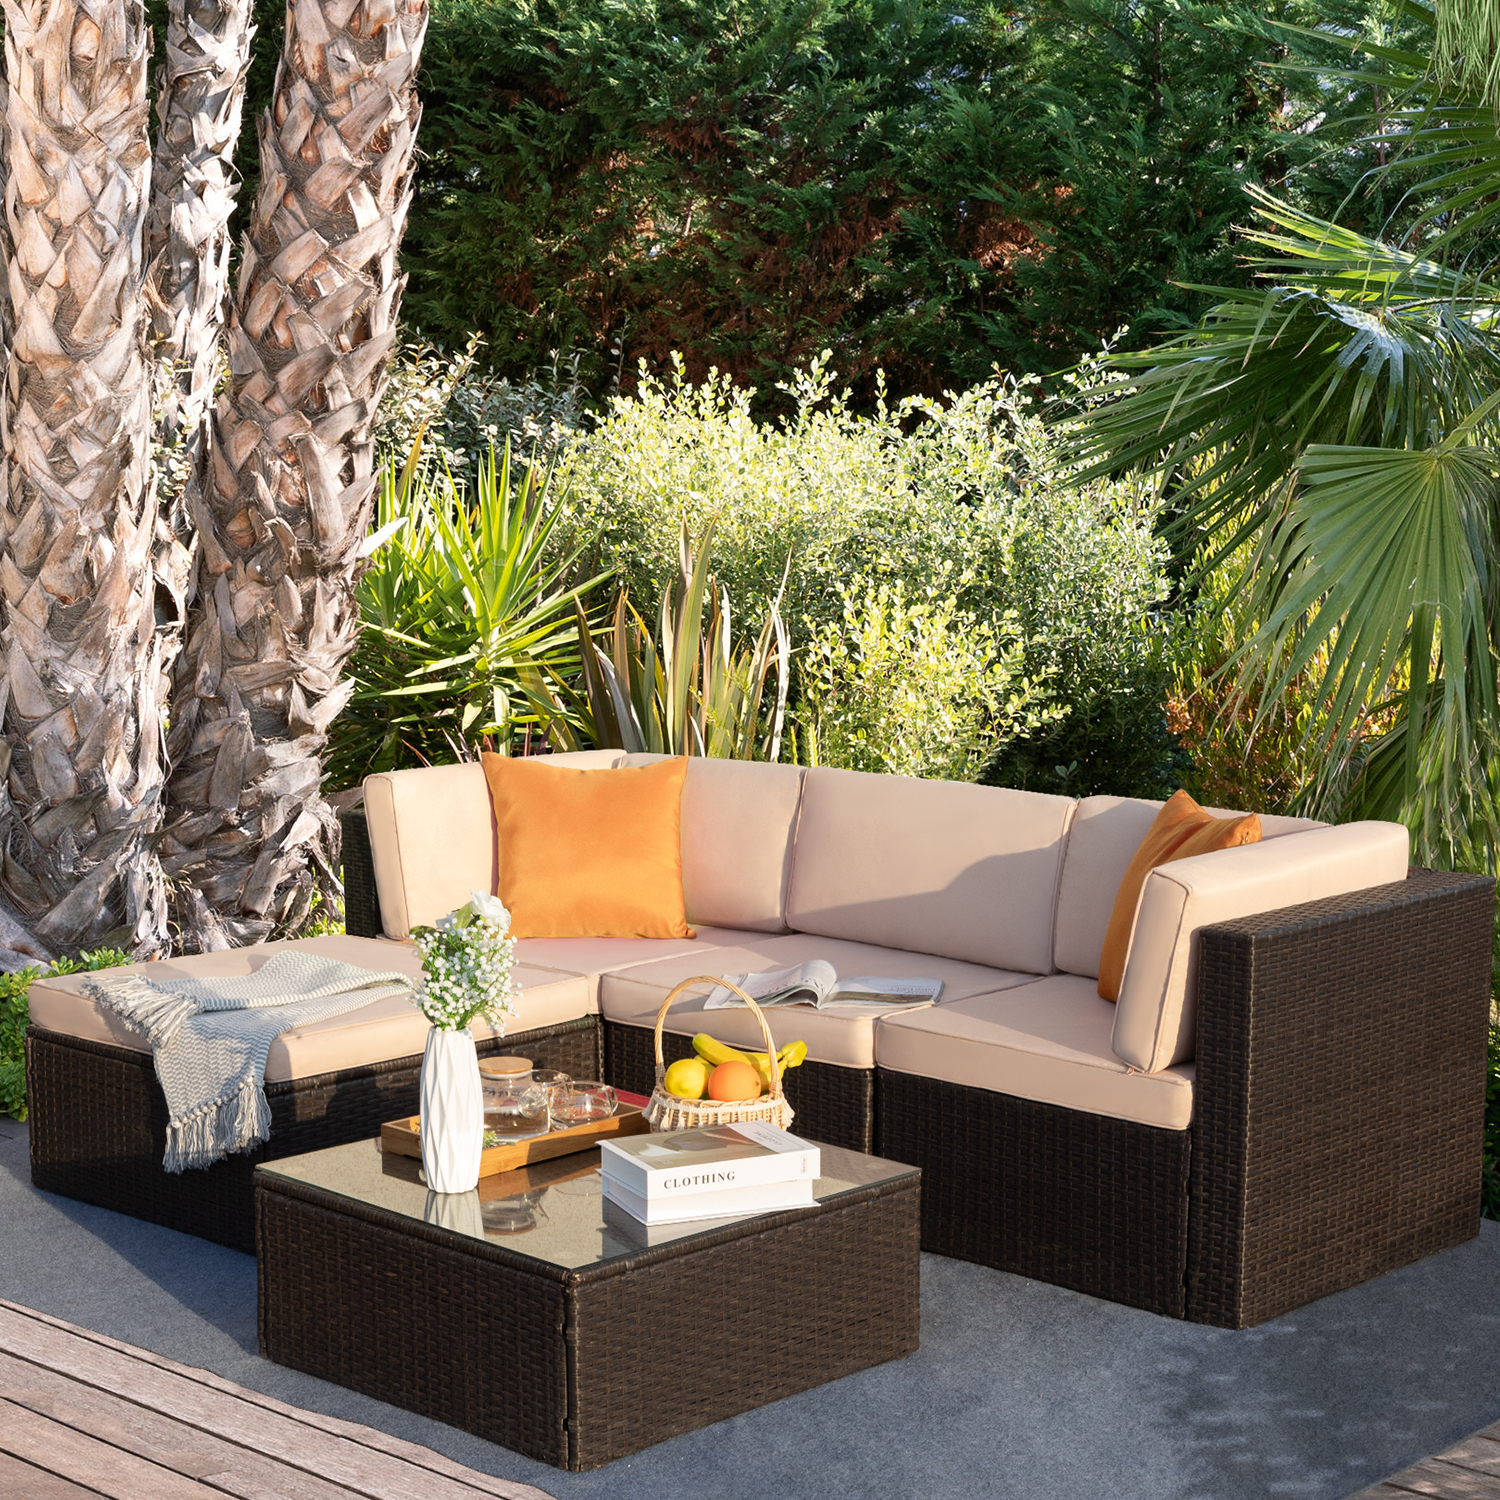 Lacoo 5 Pieces All-Weather Conversation Set and Glass Table Orange Pillow, Garden, 4, Rattan - image 4 of 7